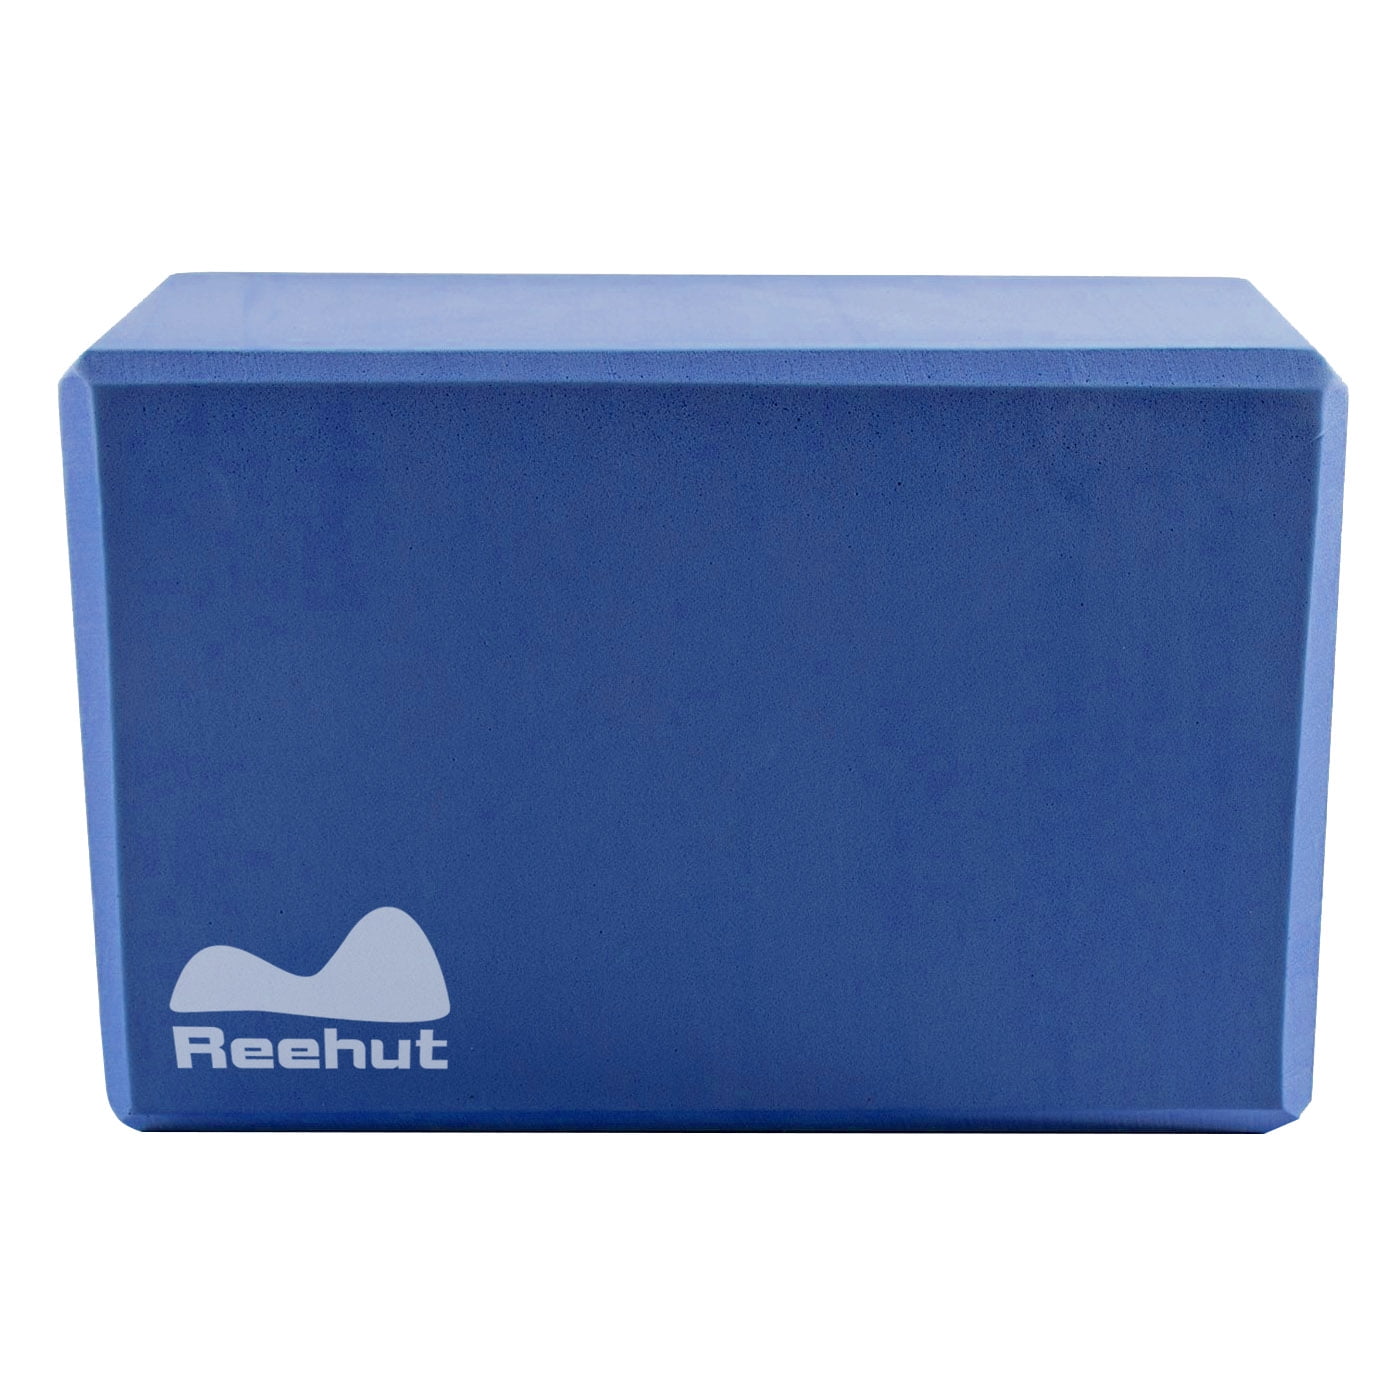 Improve Strength and Aid Balance and Flexibility Lightweight Odor Resistant High Density EVA Foam Blocks to Support and Deepen Poses REEHUT Yoga Blocks 1-PC/ 2-PC 